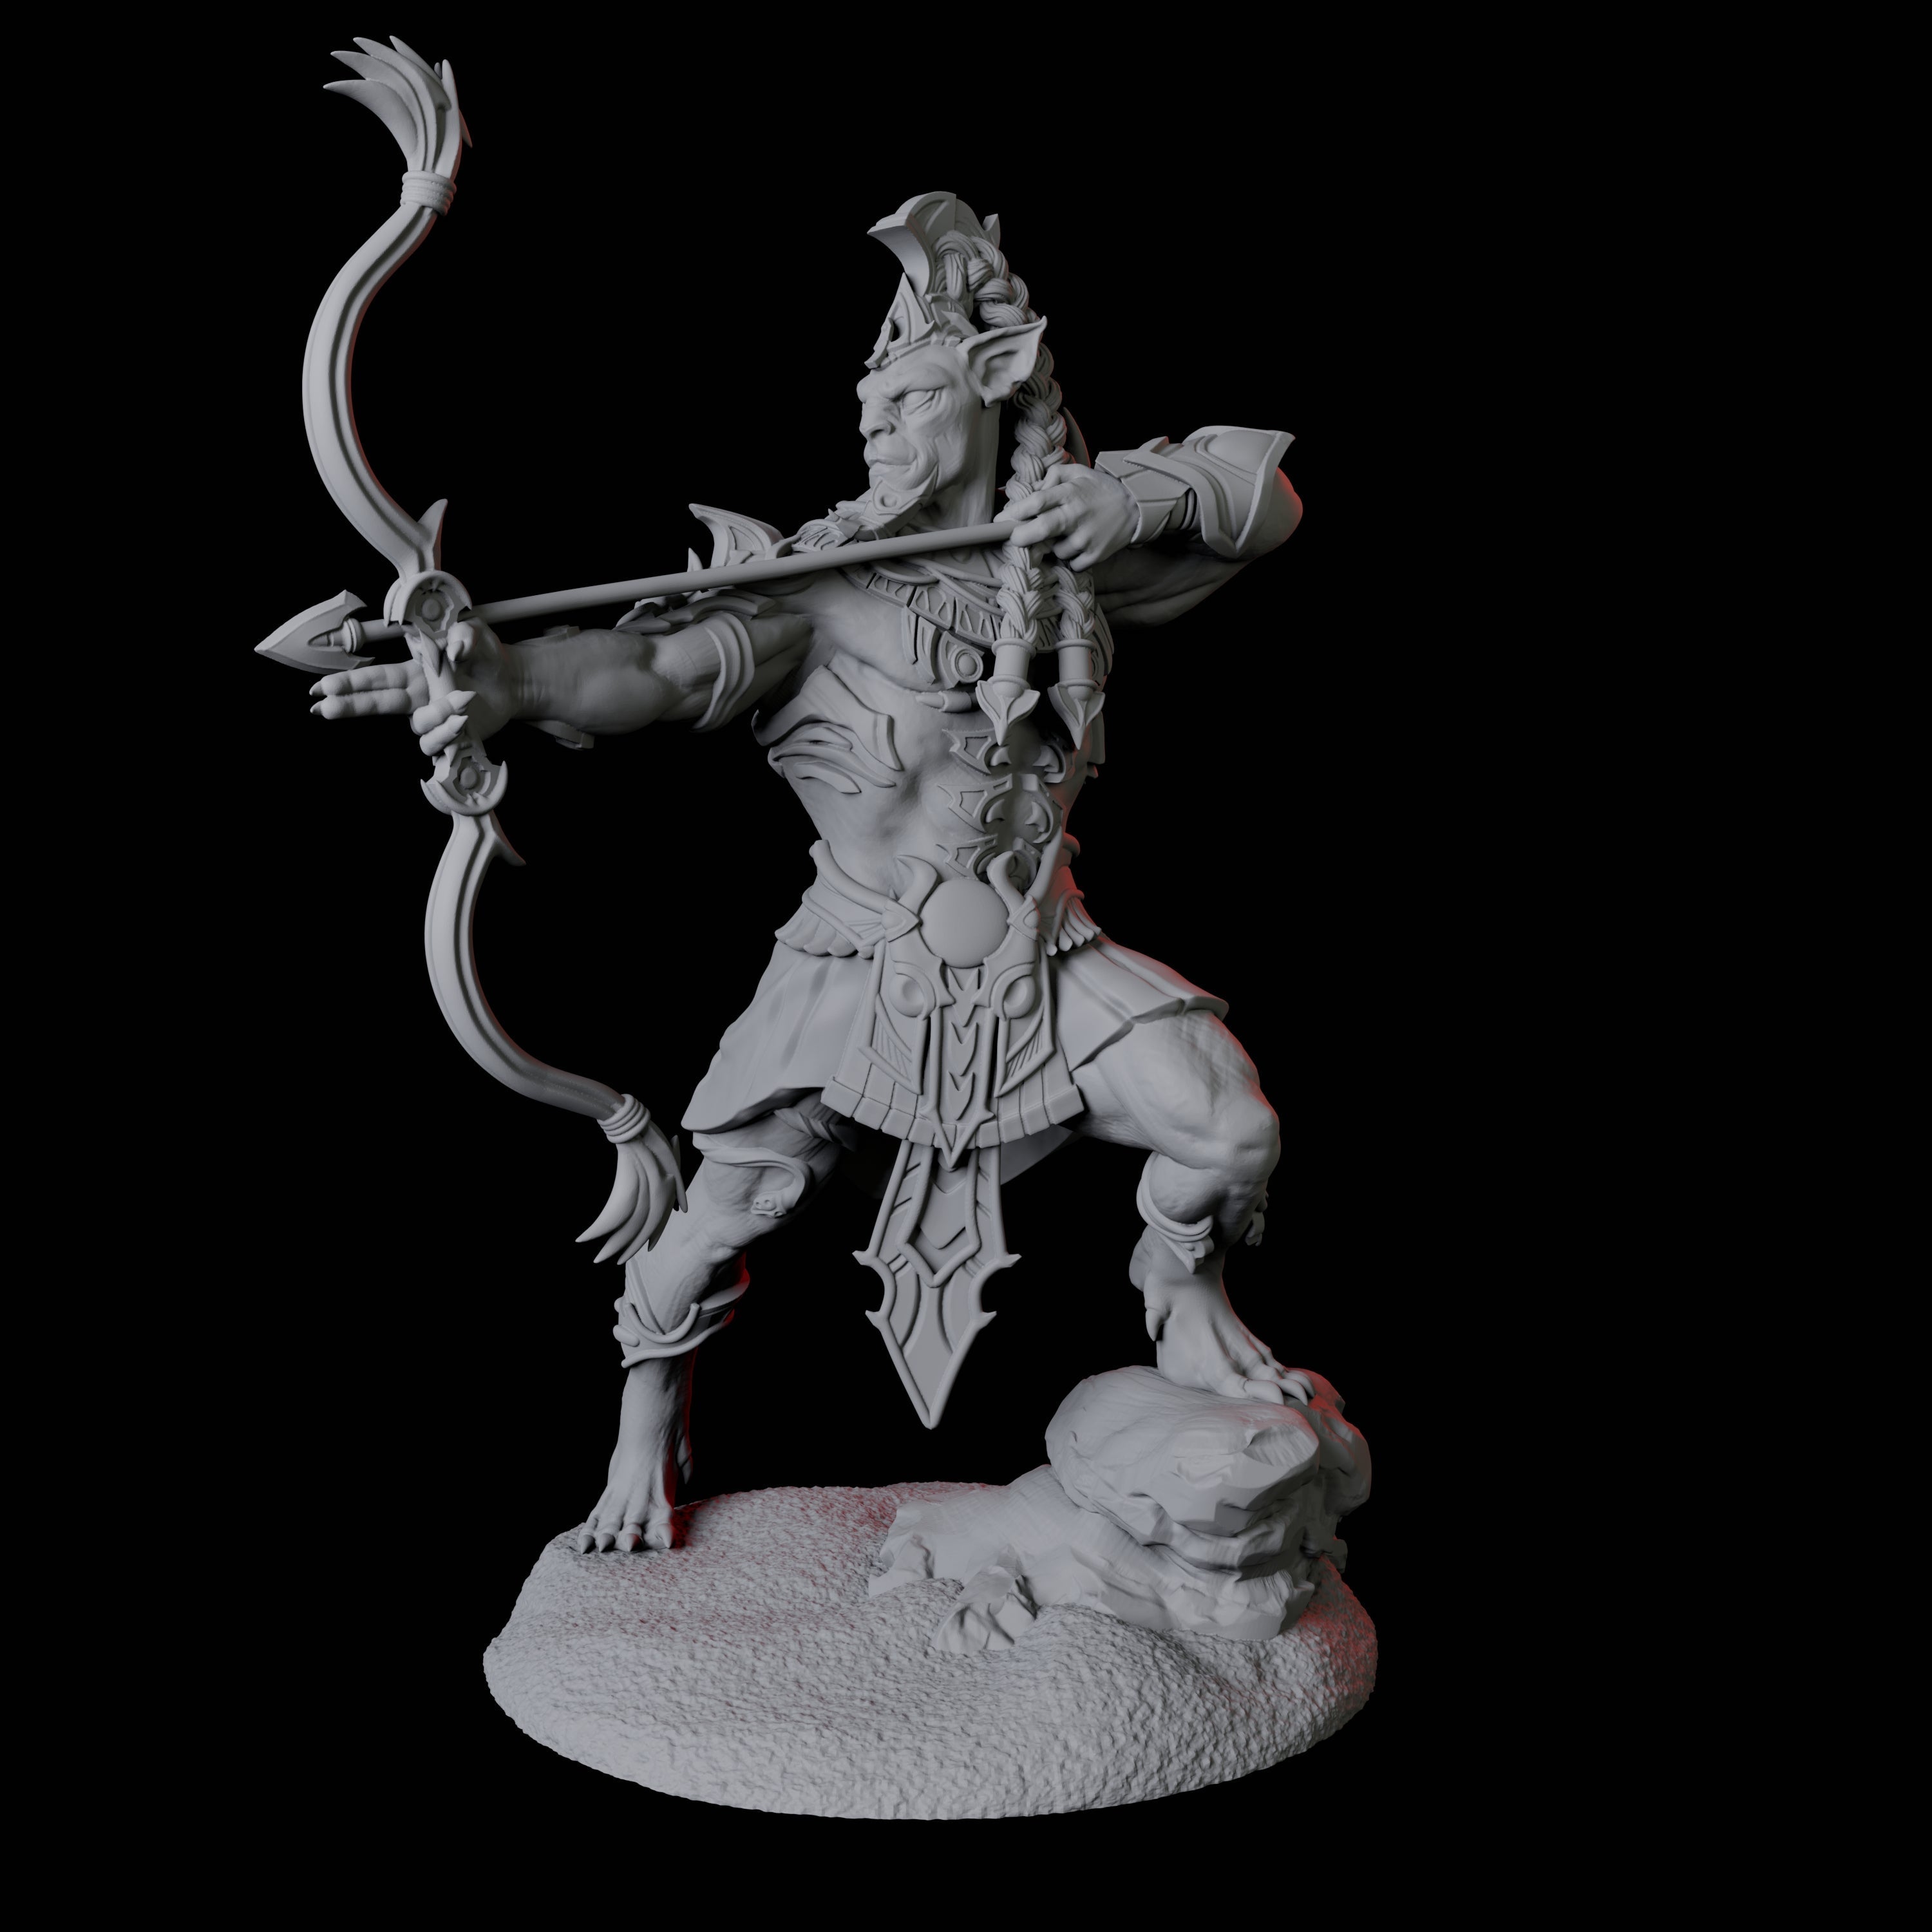 Powerful Tabaxi Warrior B Miniature for Dungeons and Dragons, Pathfinder or other TTRPGs